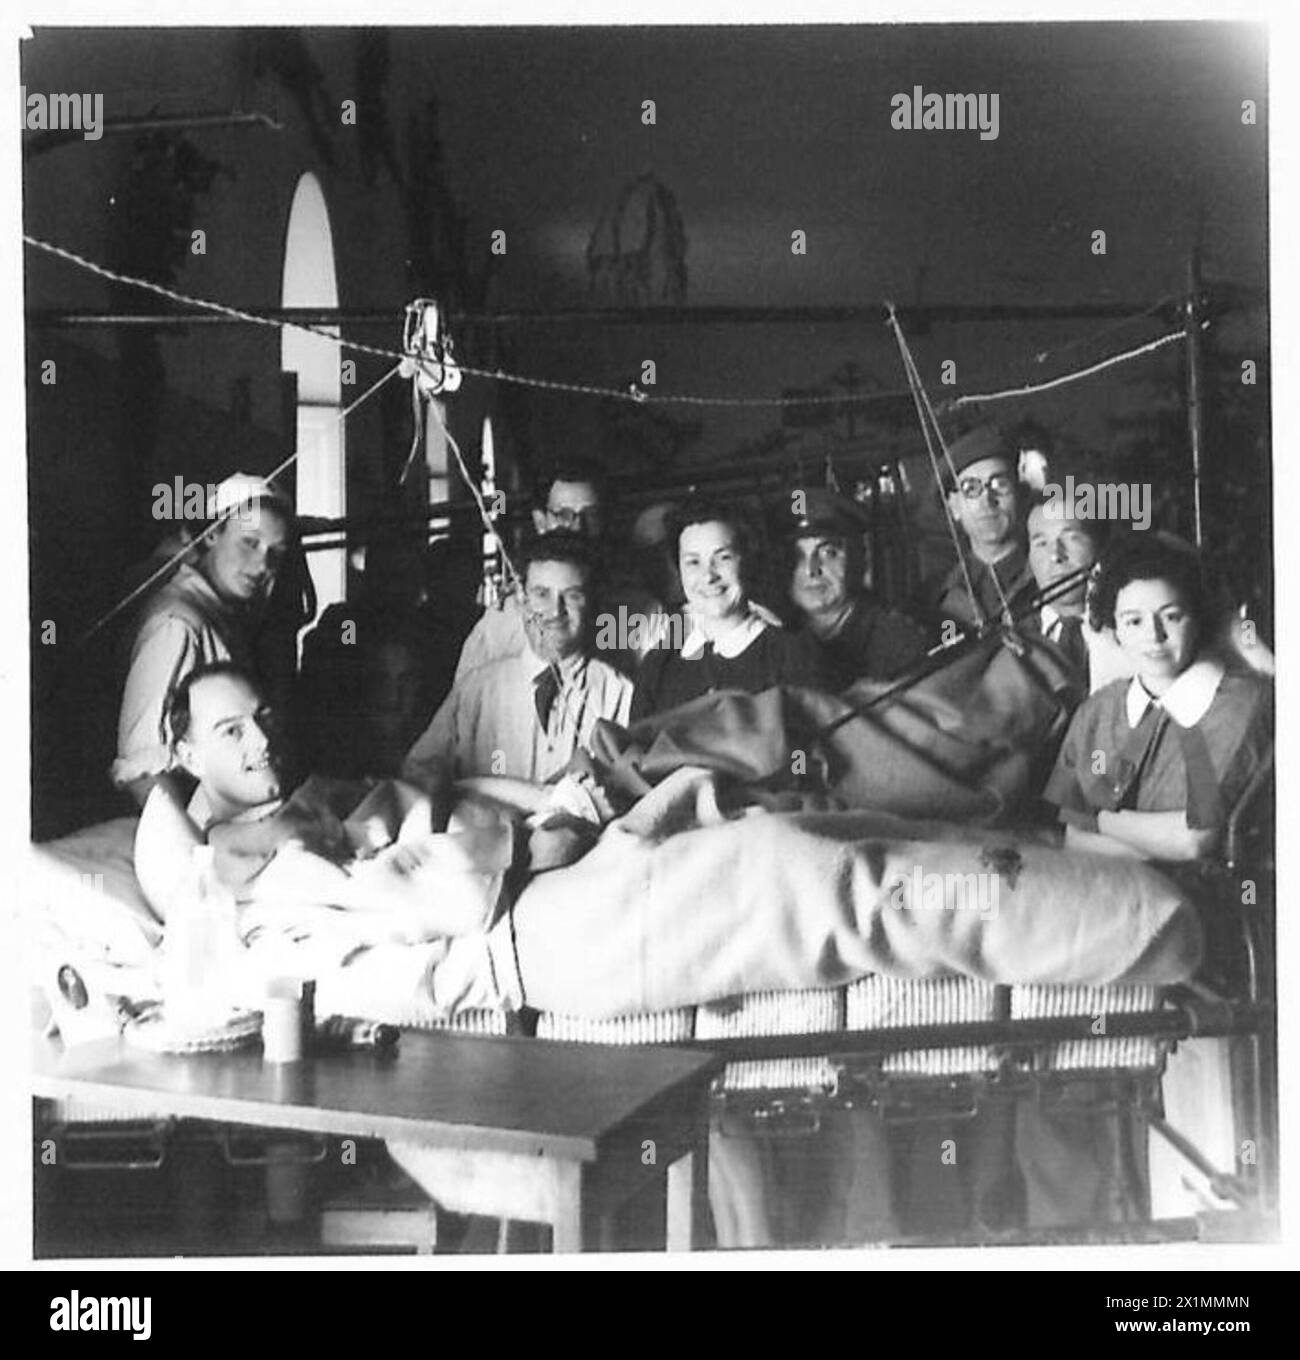 CHRISTMAS AT 104 BRITISH GENERAL HOSPITAL : OBSERVER STORY - Left to right:- Sgt. C.H. Robson, Grenadier Guards of 36 Rosalind Street, Ashington, Northumberland VAD Isuelt Passy of St.Anta, Carris Bay, Cornwall. Pte. J. Davies, R.A.S.C., of Astra, Thompson Avenue, Newport, Mon. Pte. E.J. Wall, R.A.M.C., of 15 Brynteg Avenue, Pontllanfriath, near Newport, Wales. Miss Thurza Crighton of Endymion Road, Hatfield, Herts Padre J.C.H. Gould of Weymouth, Dorset. Lieut James Nicol, R.A.M.C., of St.Clair, Milton Road, Kirkcaldy, Fife, SCotland Sgt. J. Gallagher, Para. Bde., home address, Belview Gate Lo Stock Photo